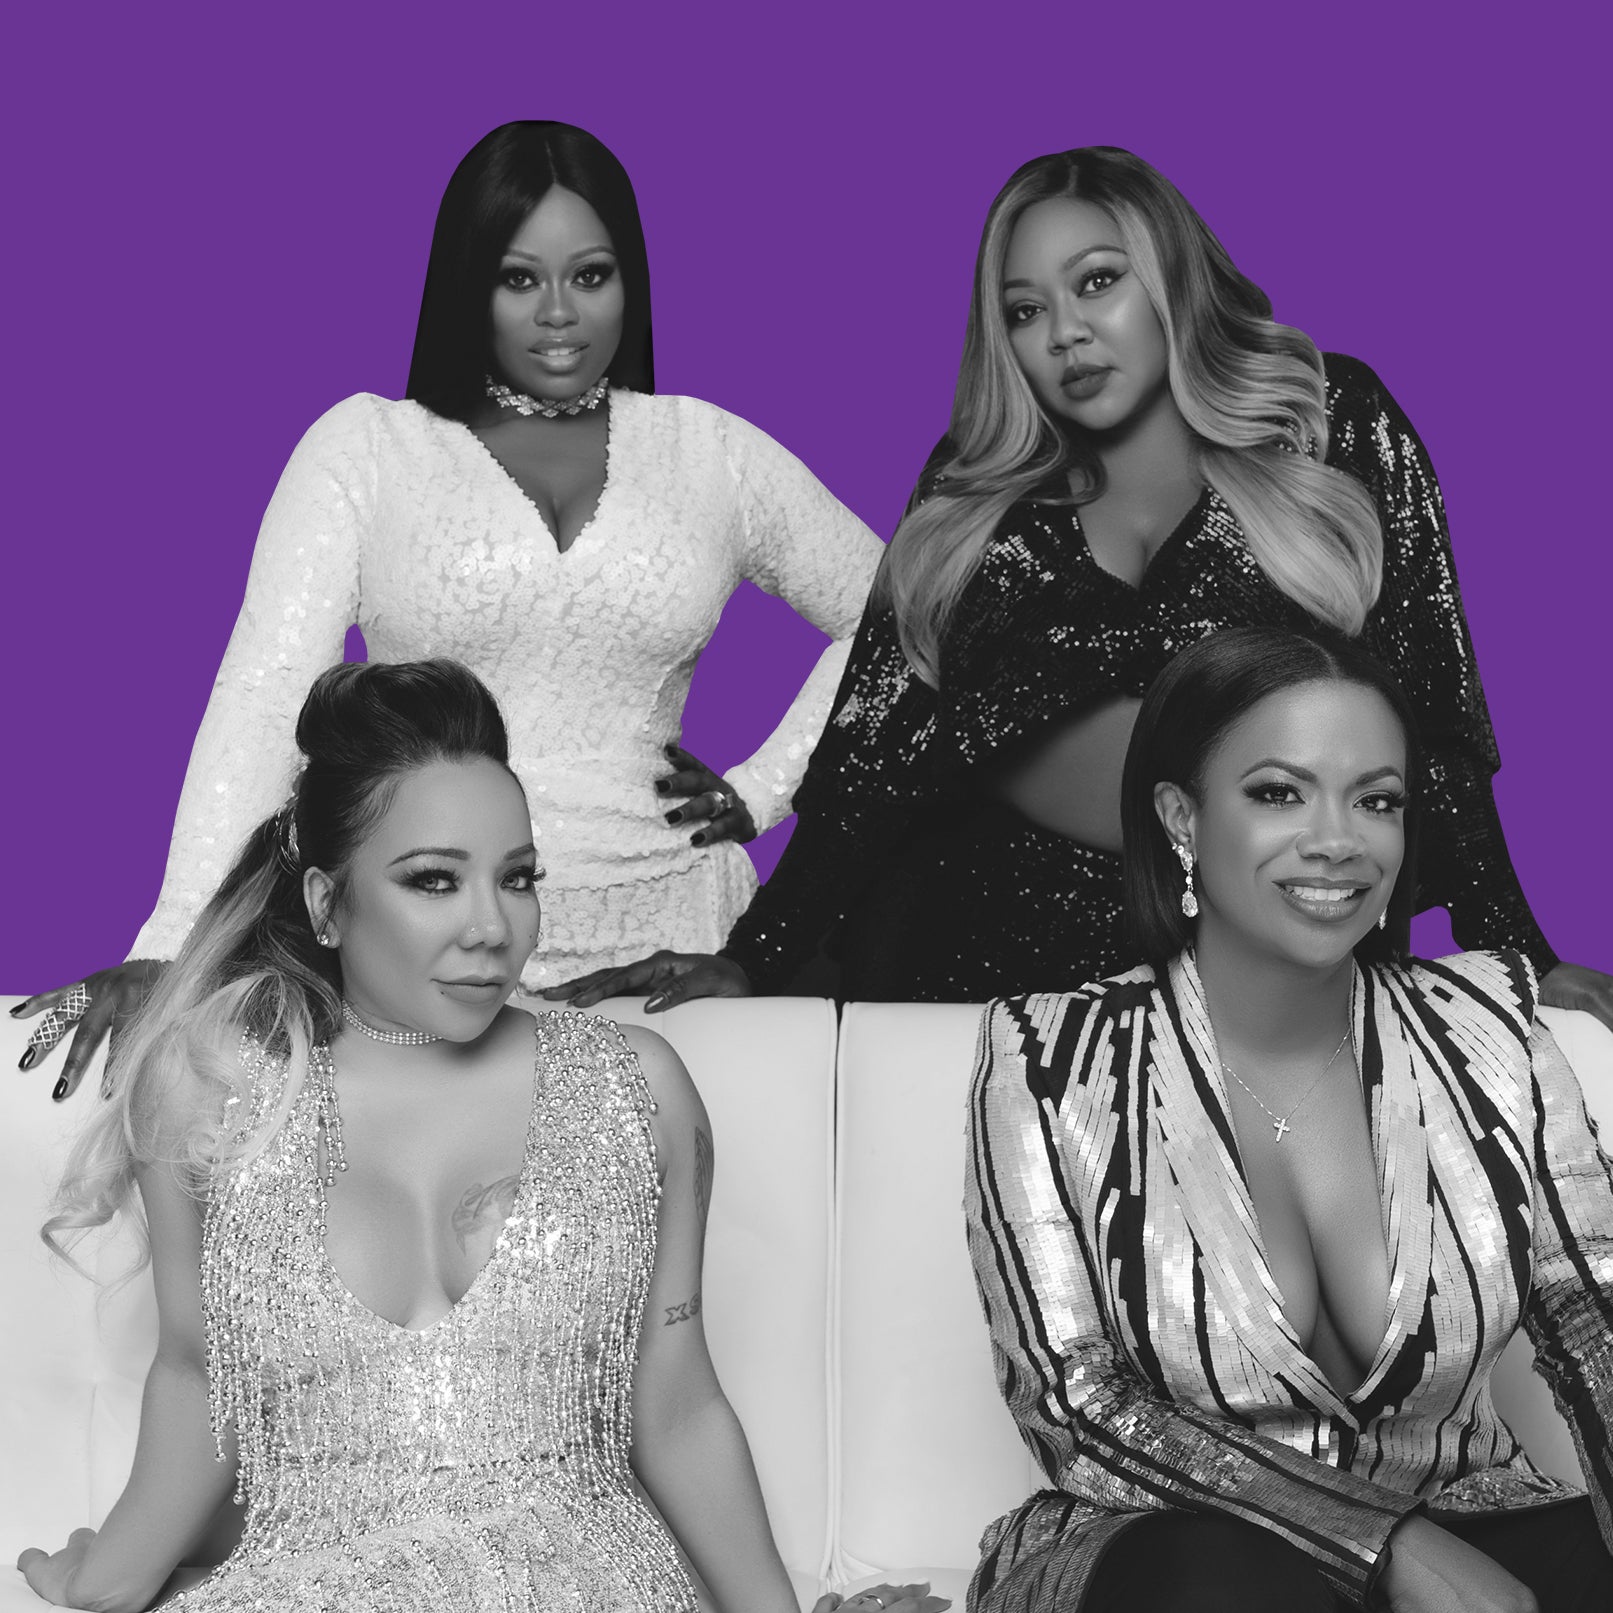 Xscape's Tamika Scott Assures Fans There's No Beef Between The Group
